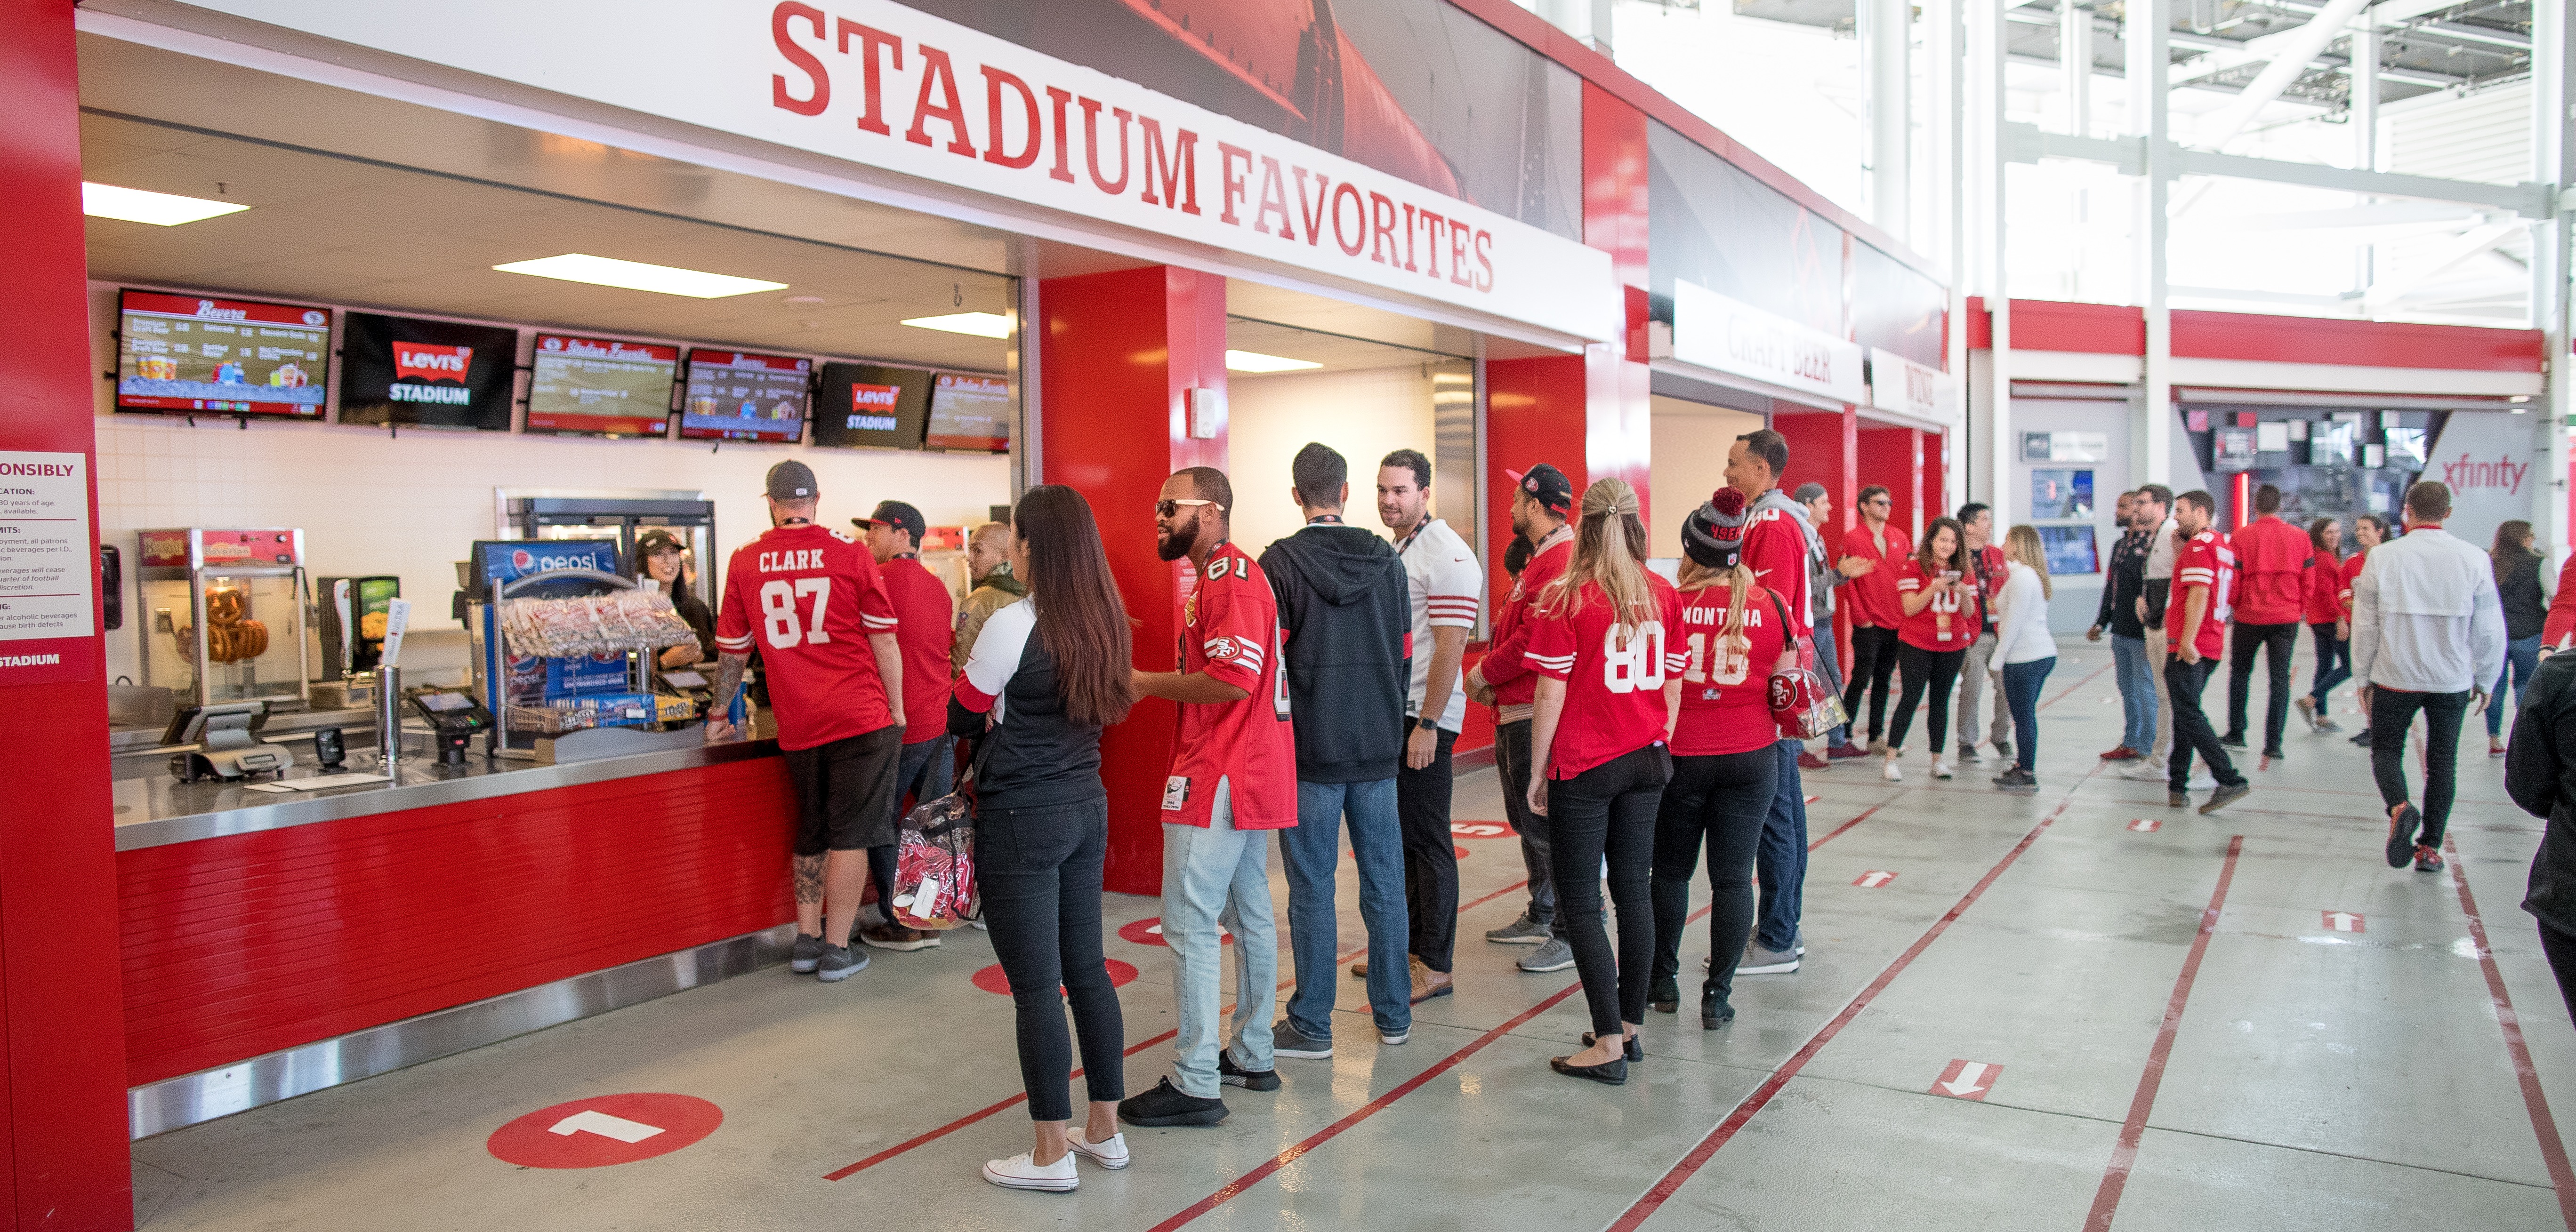 All-Inclusive Concessions Good Fit for 49ers - ACCESS